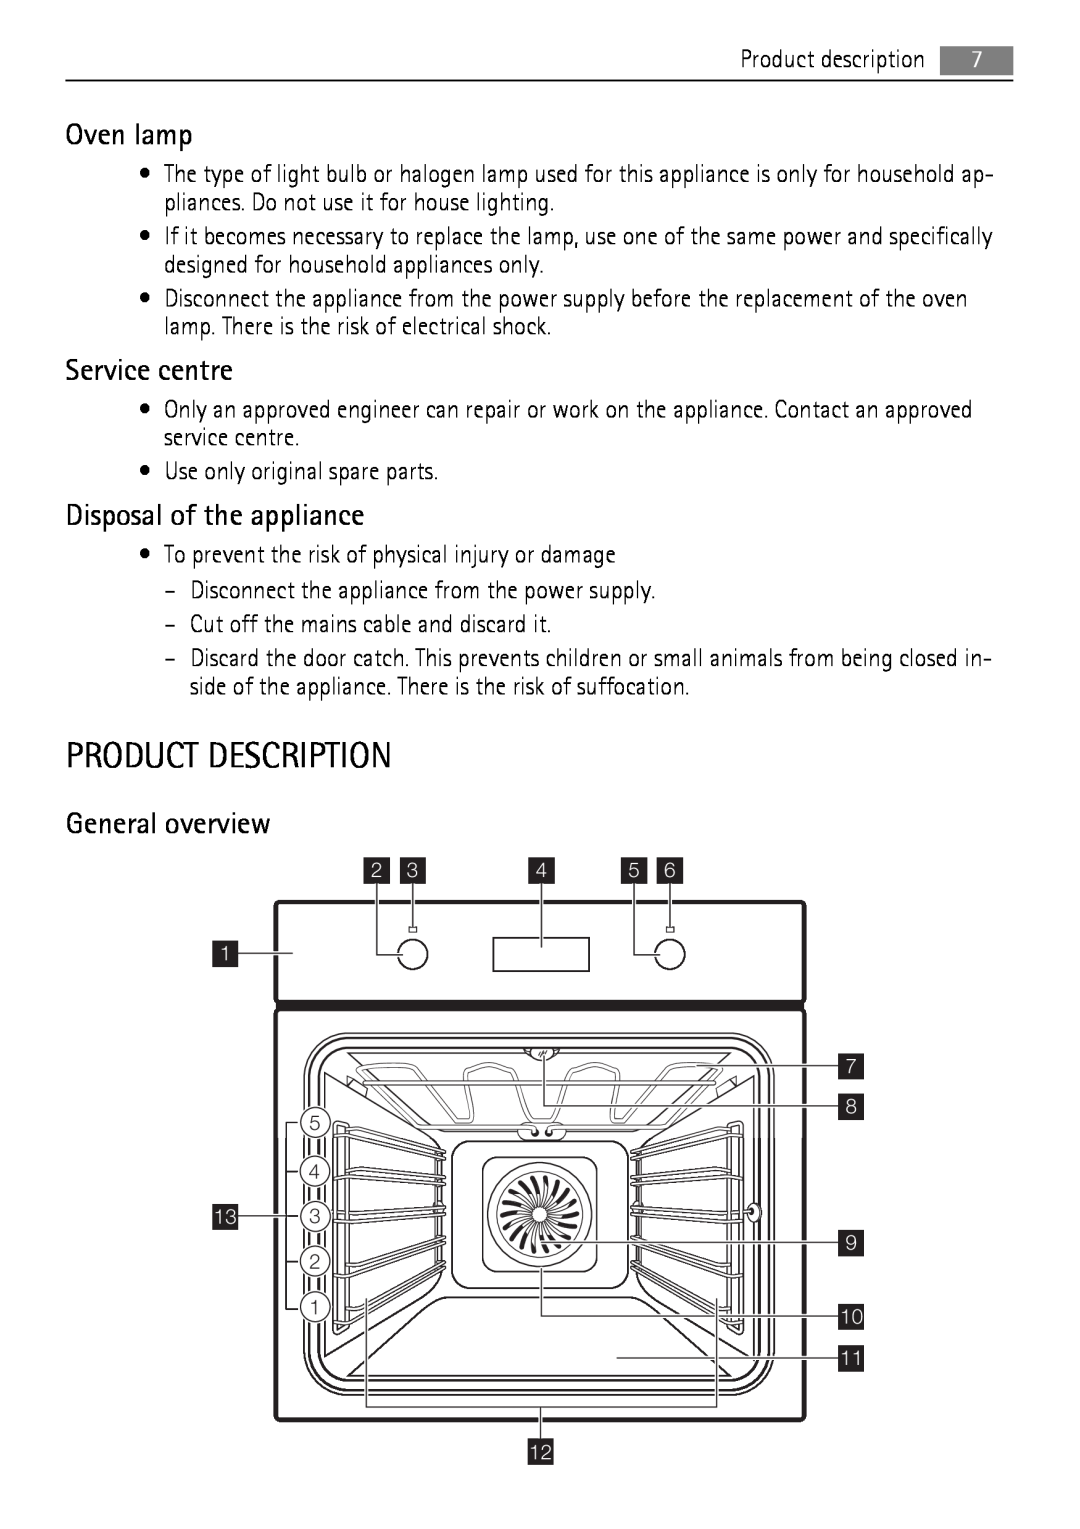 AEG BP5003001 user manual Product Description, Oven lamp, Service centre, Disposal of the appliance, General overview 